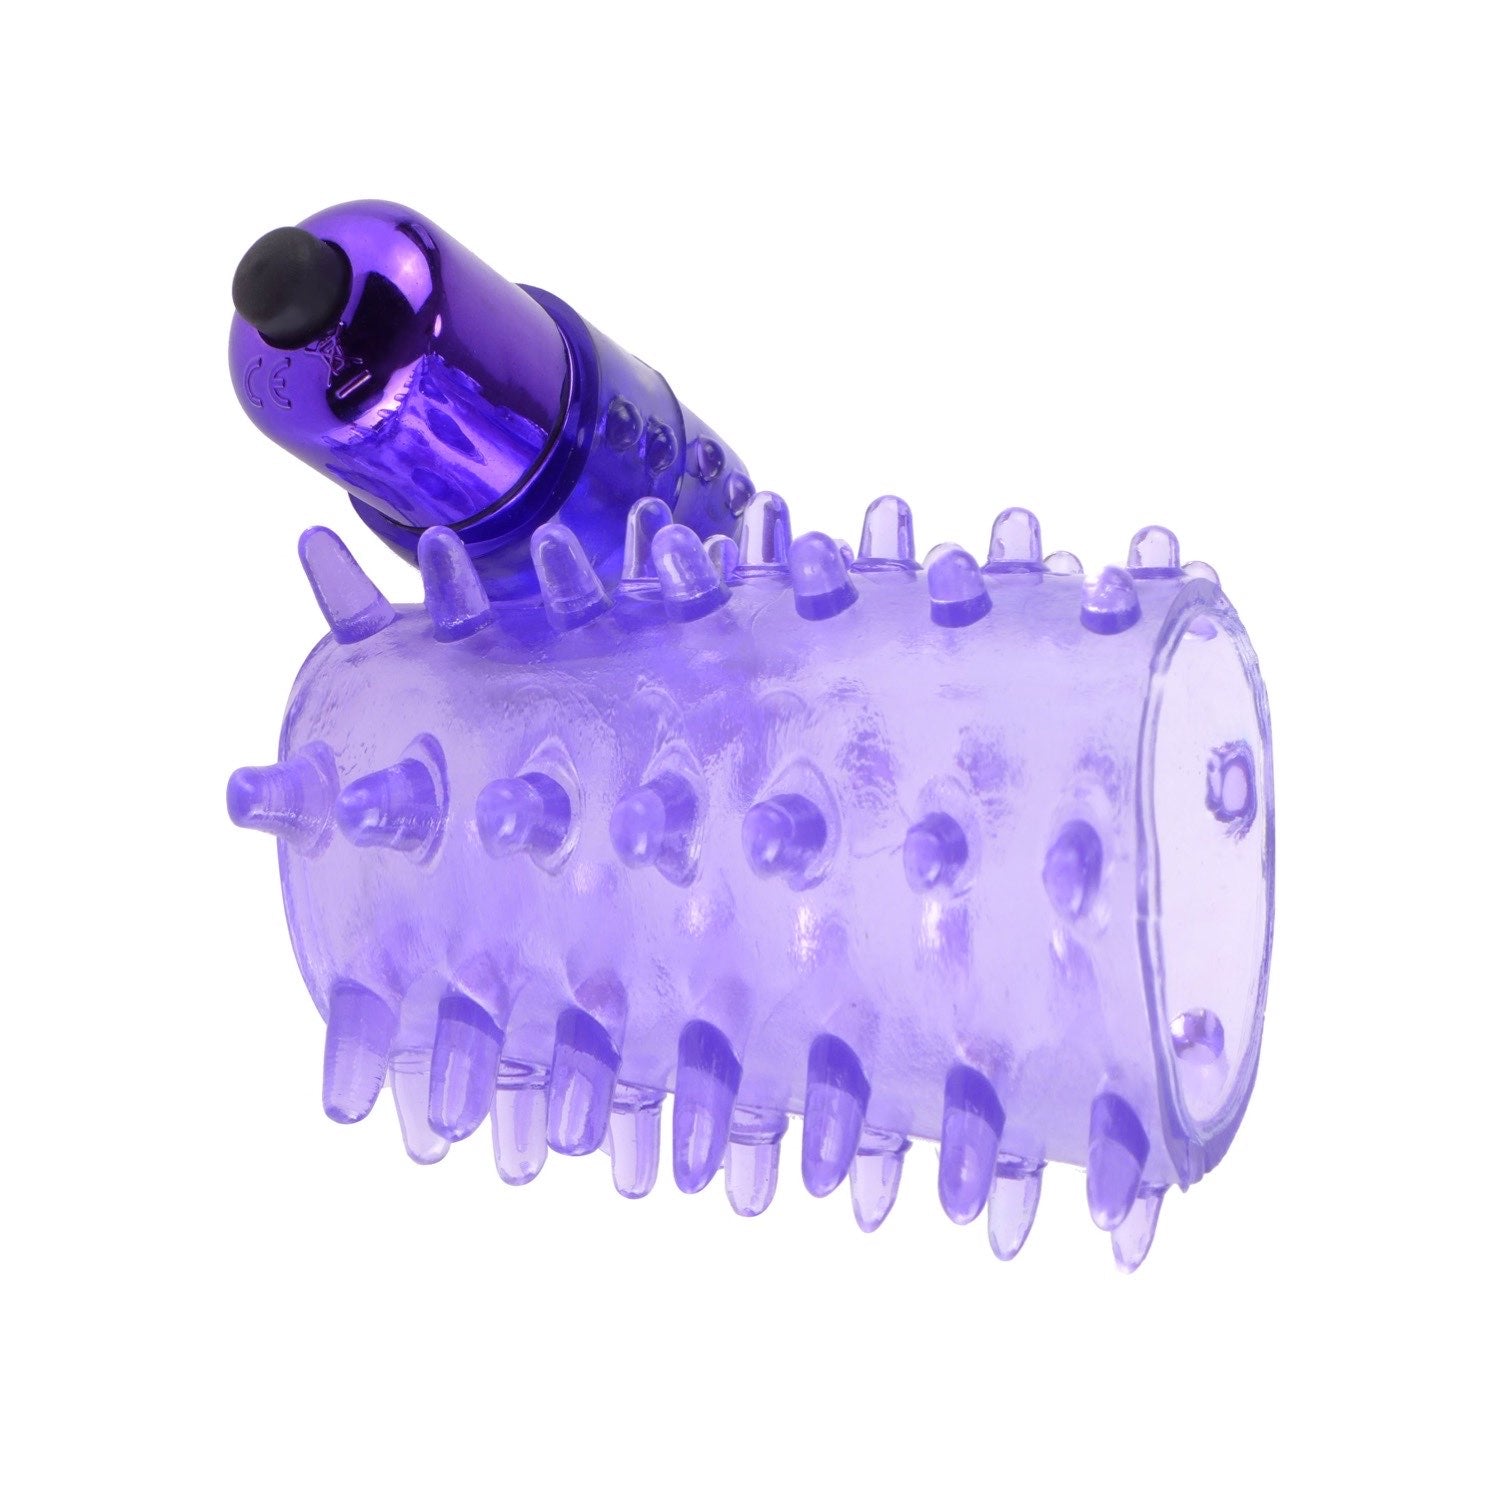 Fantasy C-Ringz Vibrating Super Sleeve - Purple Vibrating Penis Sleeve by Pipedream